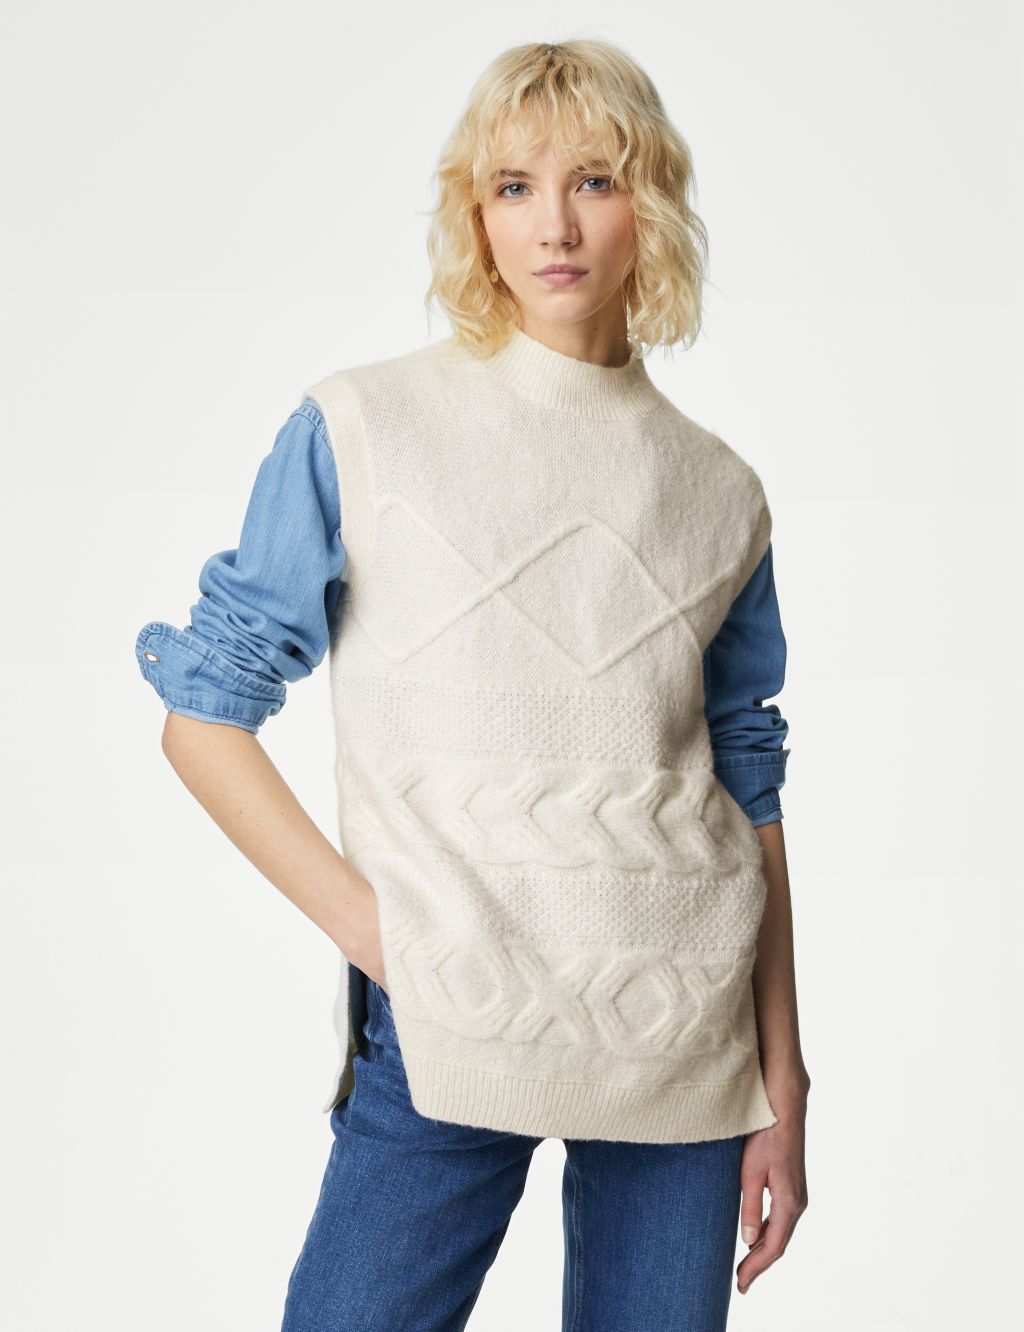 Cable Knitted Vest with Wool image 1